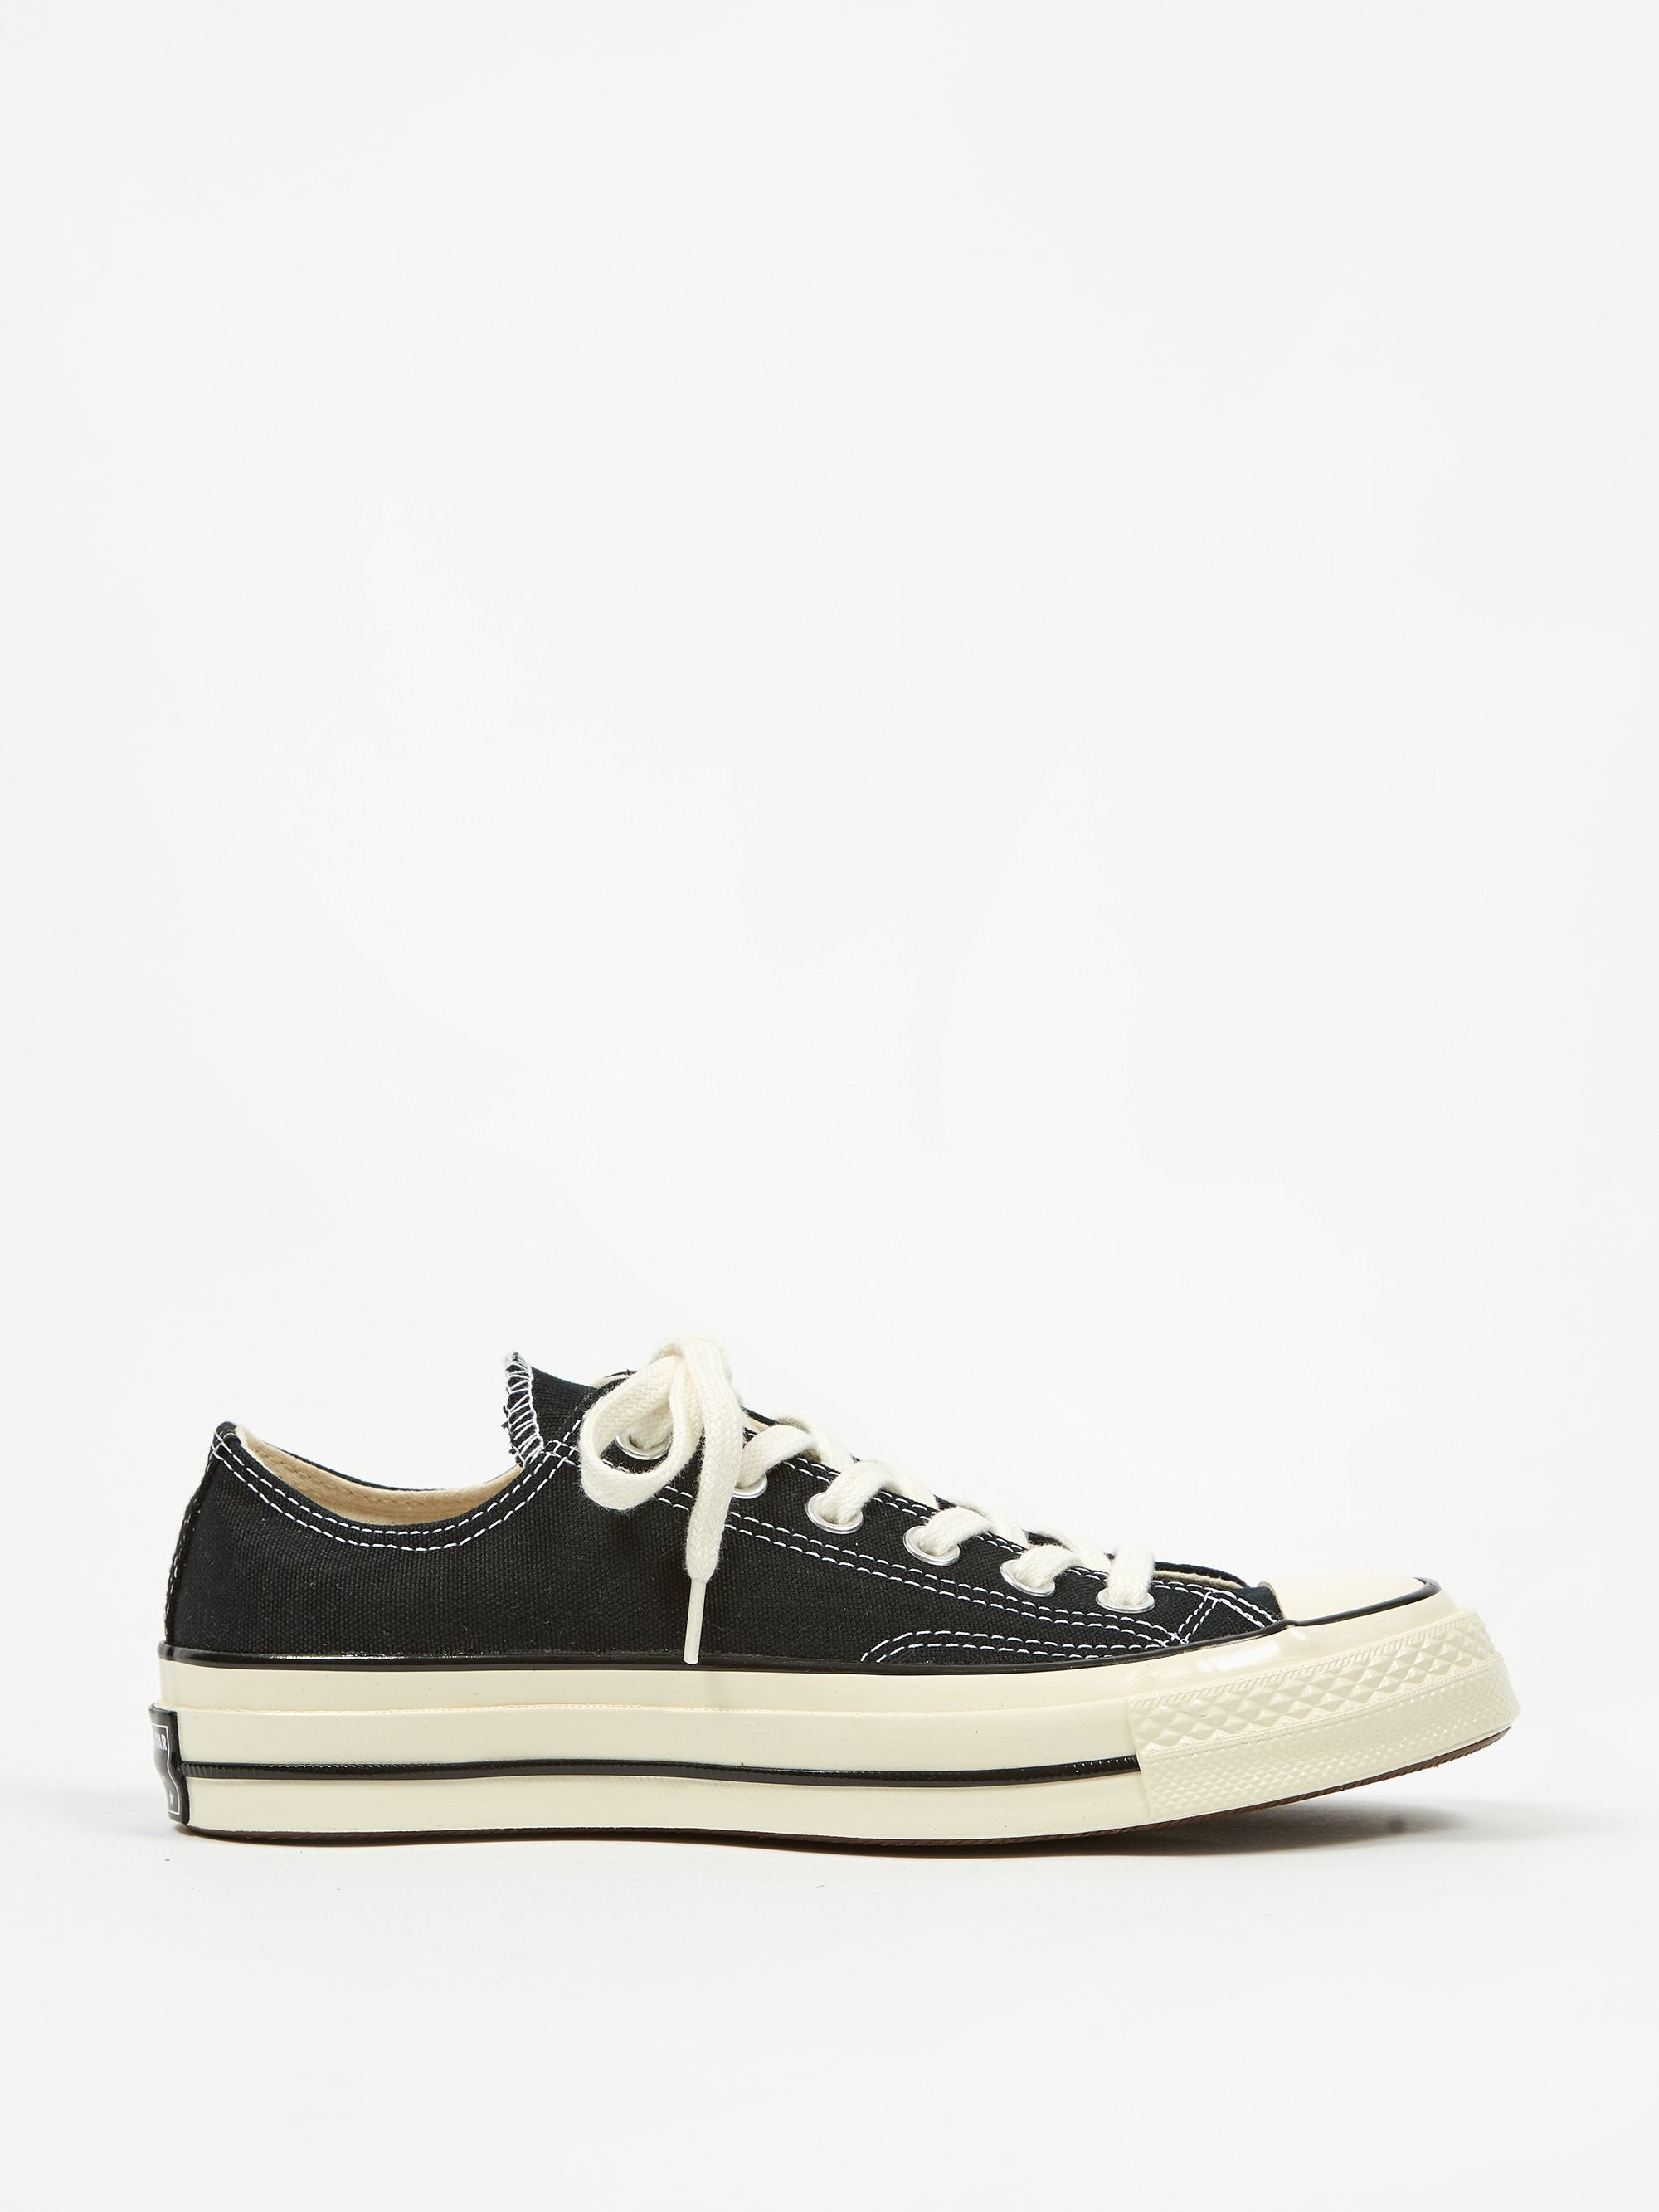 converse 70s philippines,Quality 